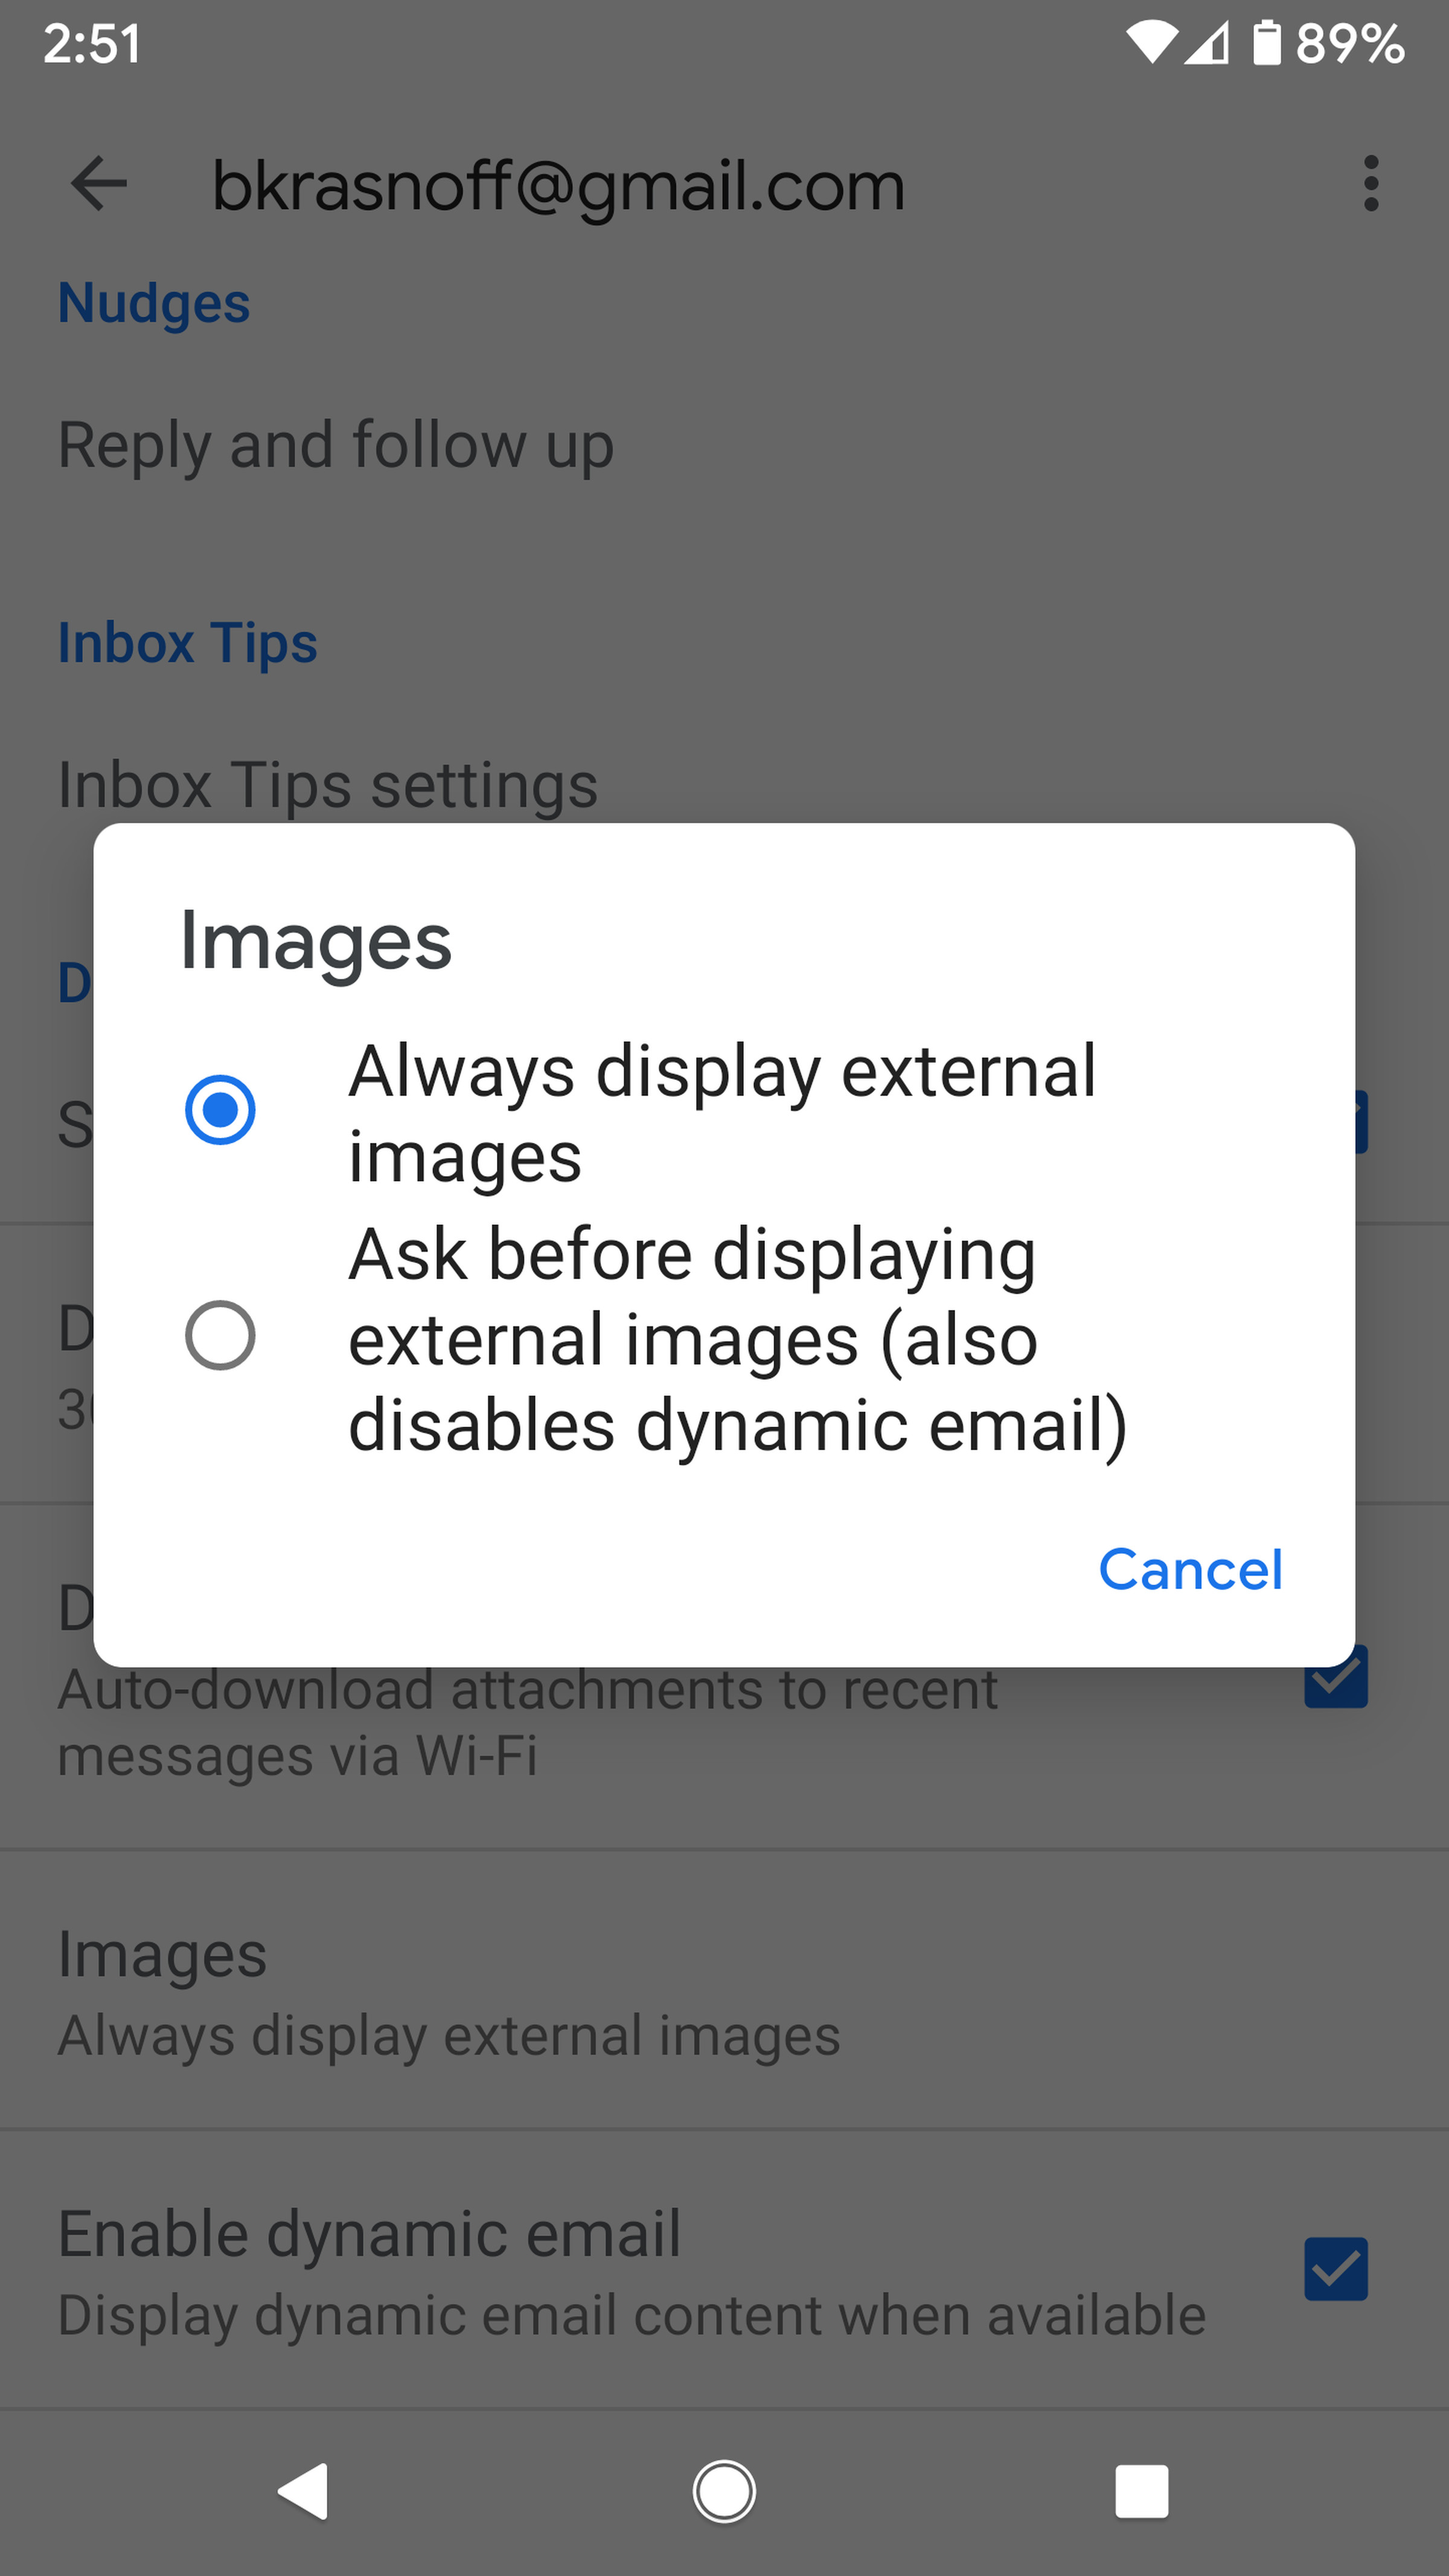 Select “Ask before displaying external images.”